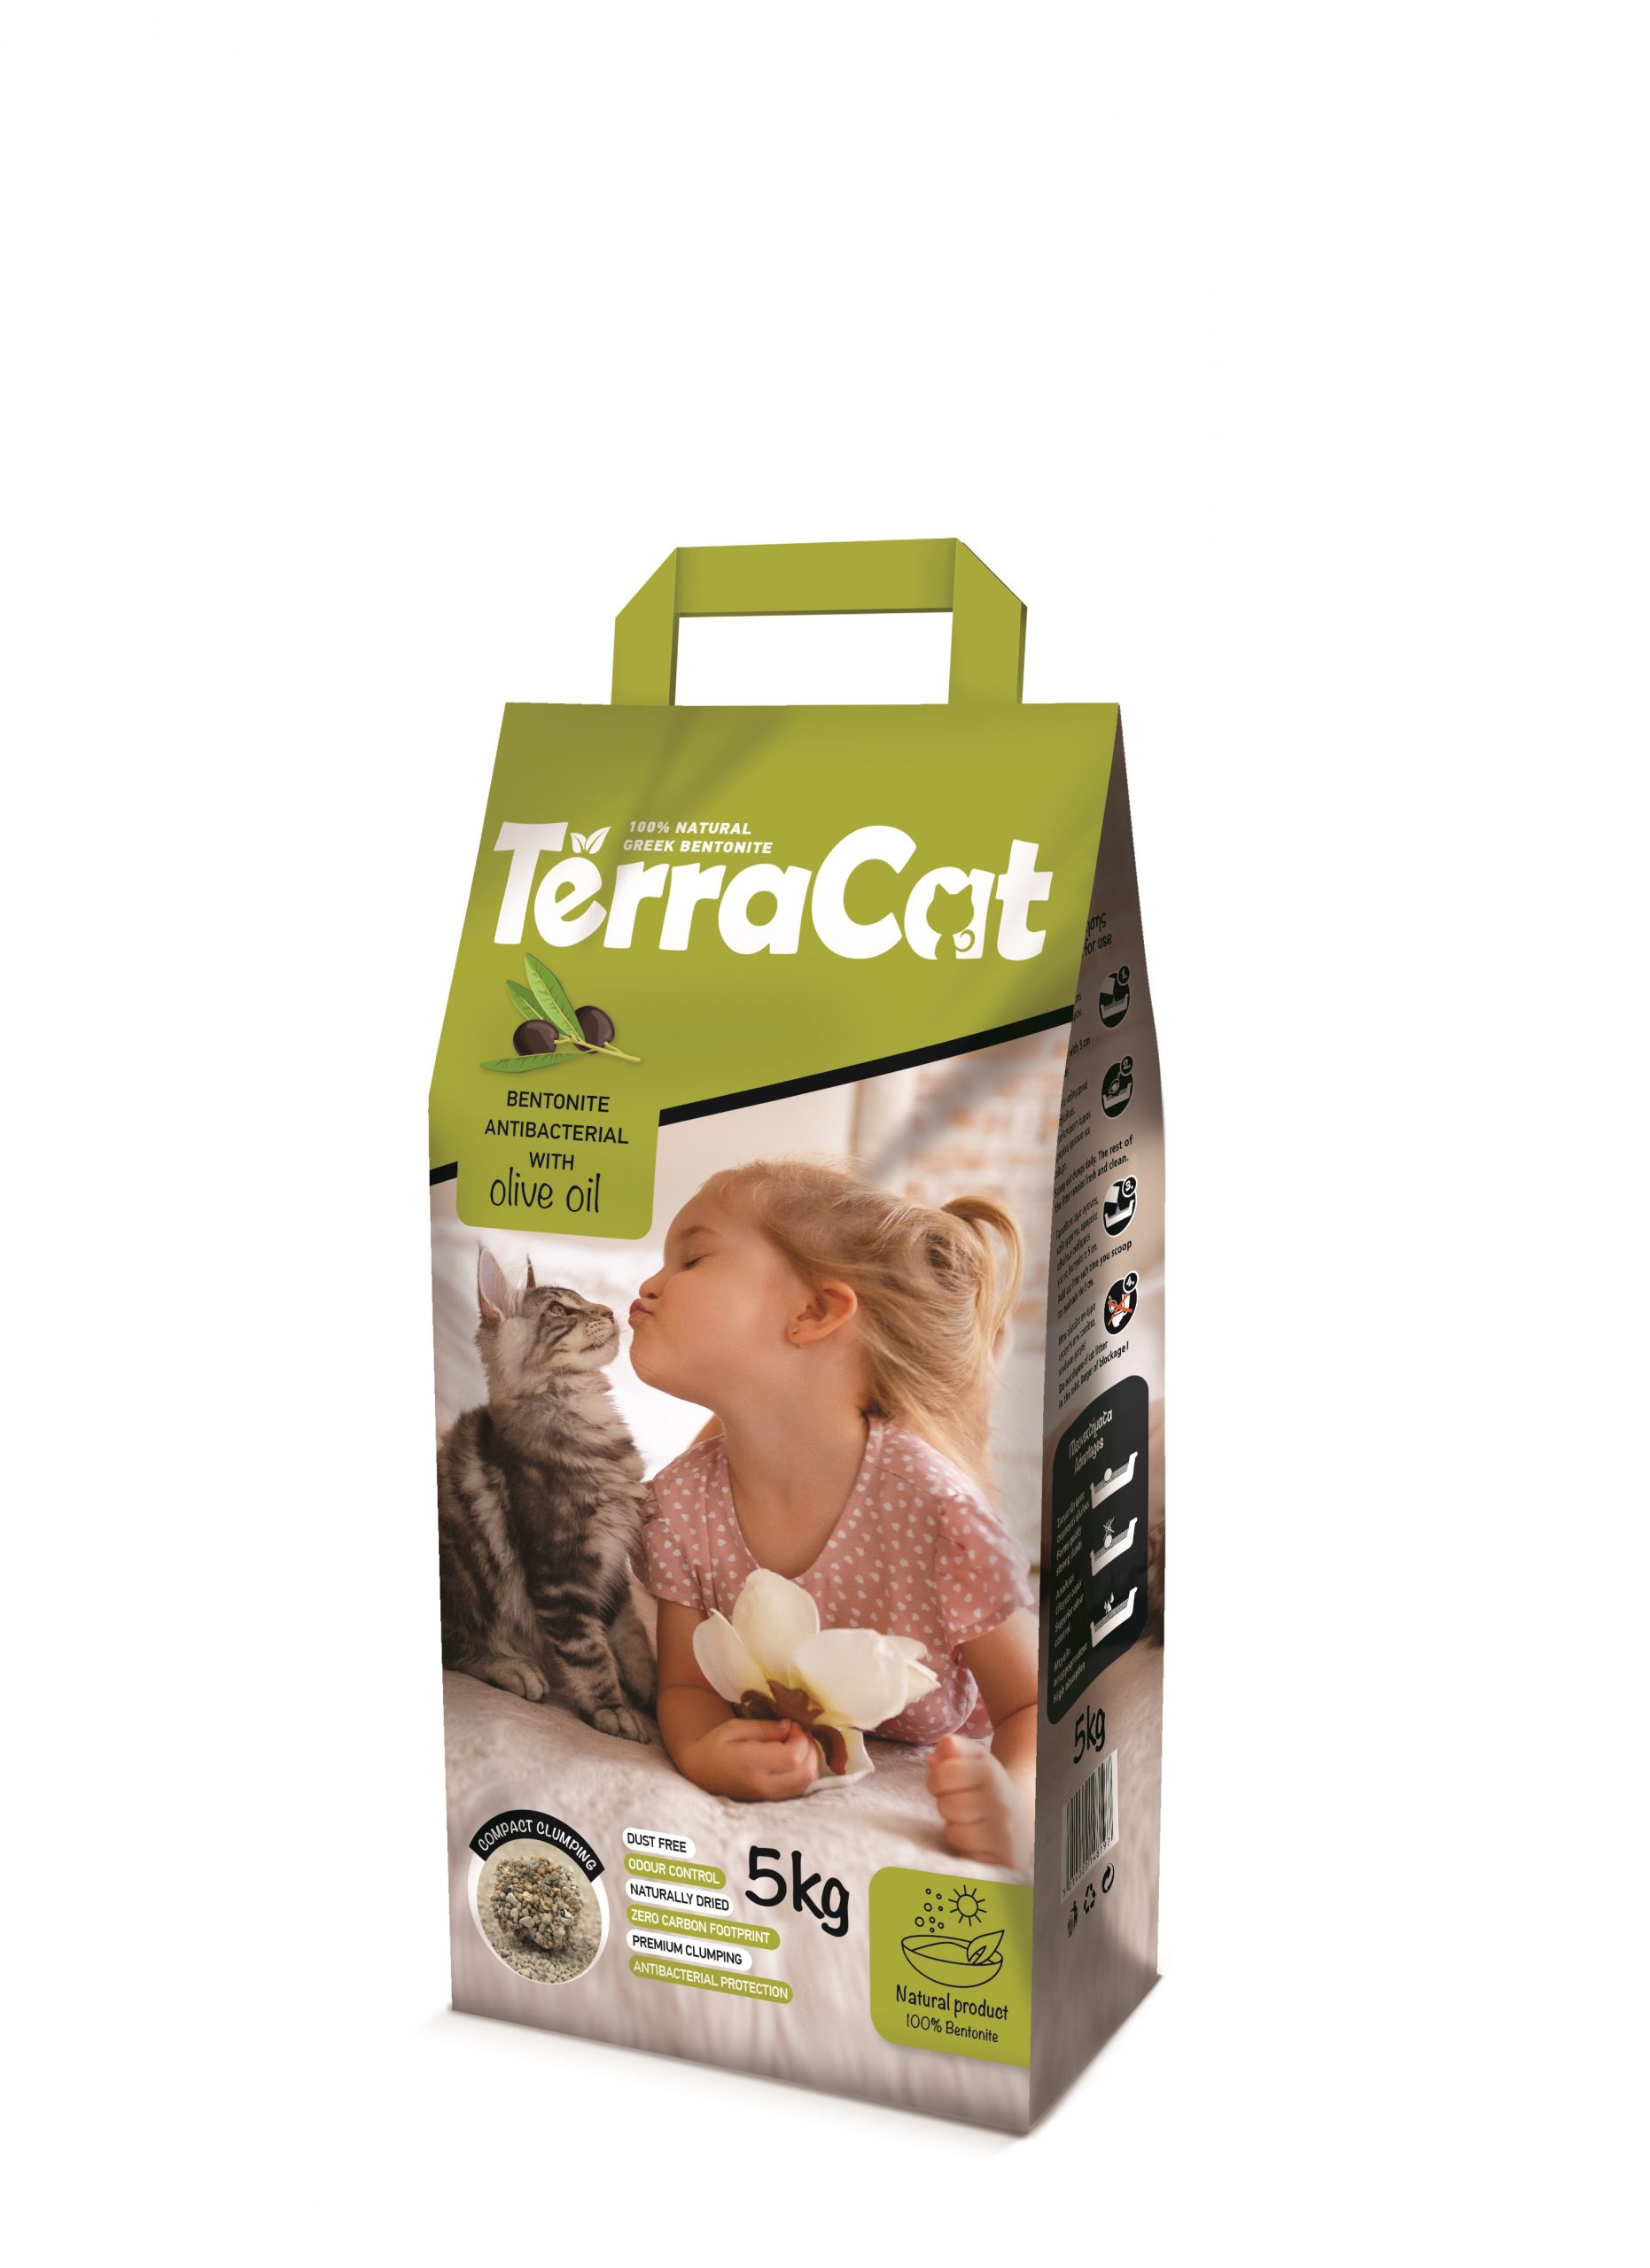 Terra Cat Natural Cat Litter (5kg) perfurmed with olive oil